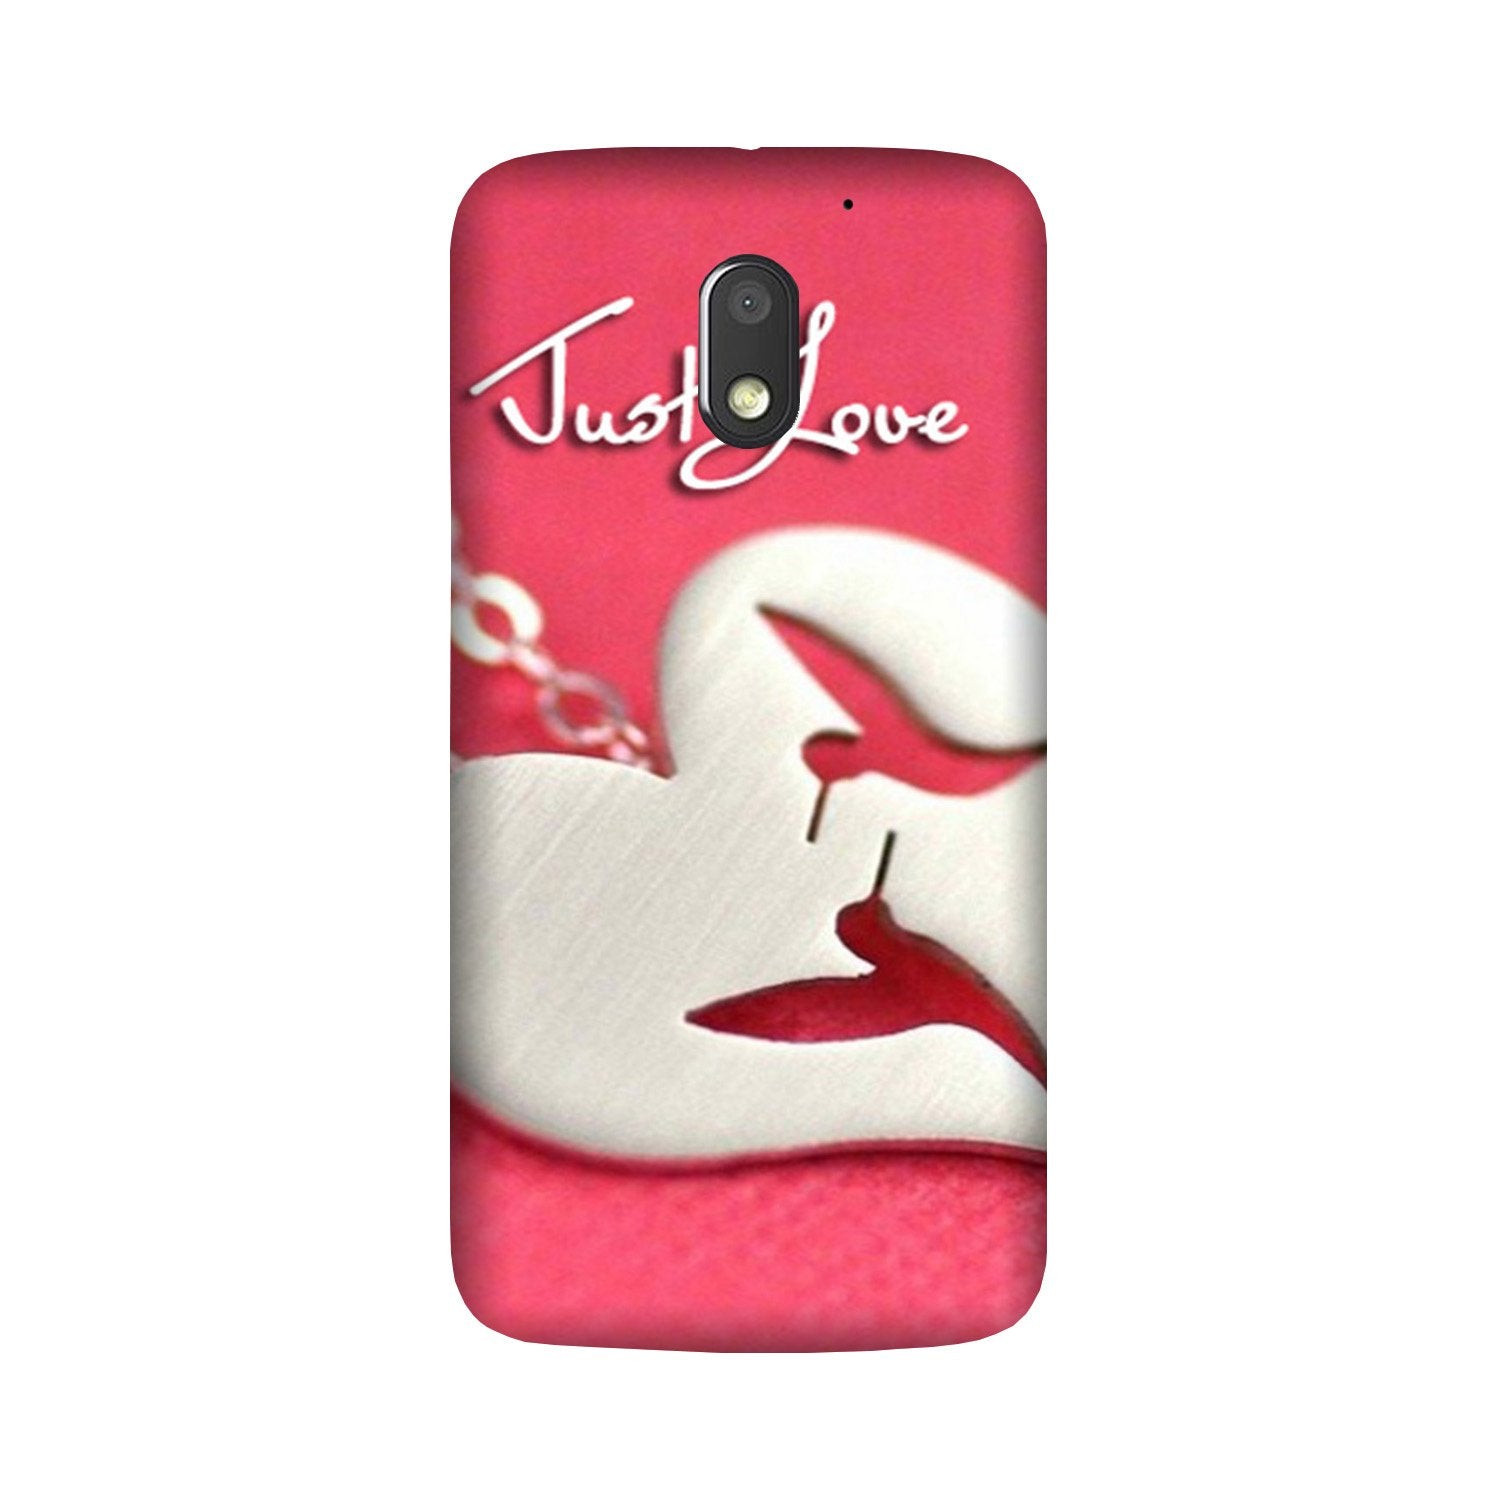 Just love Case for Moto G4 Play